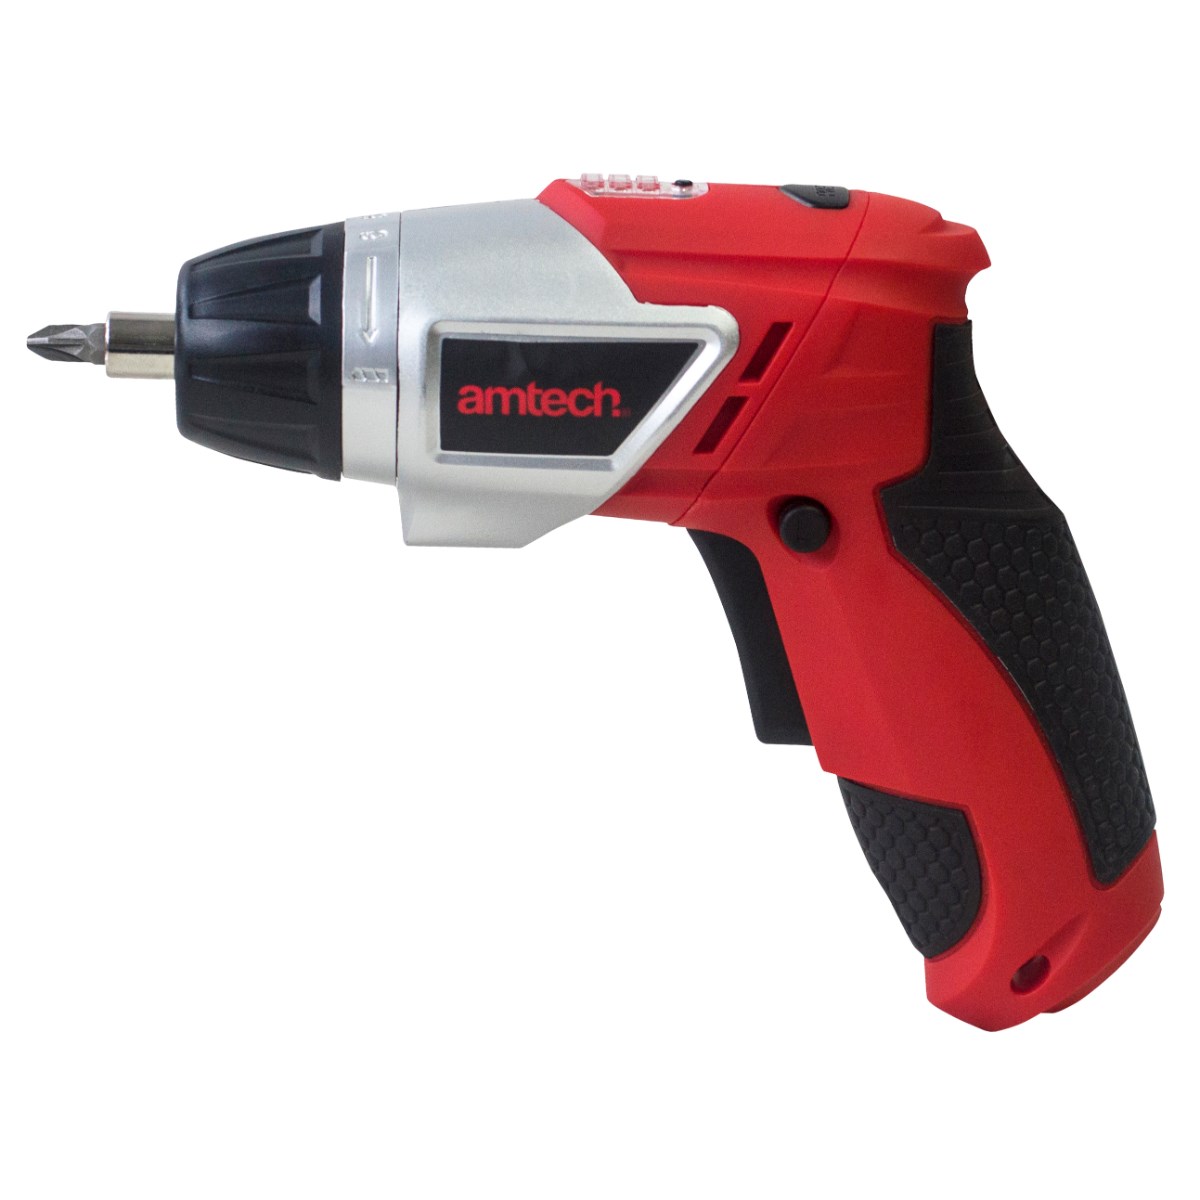 Amtech V6500 3.6V Cordless Screwdriver set with Lithium-ion Battery